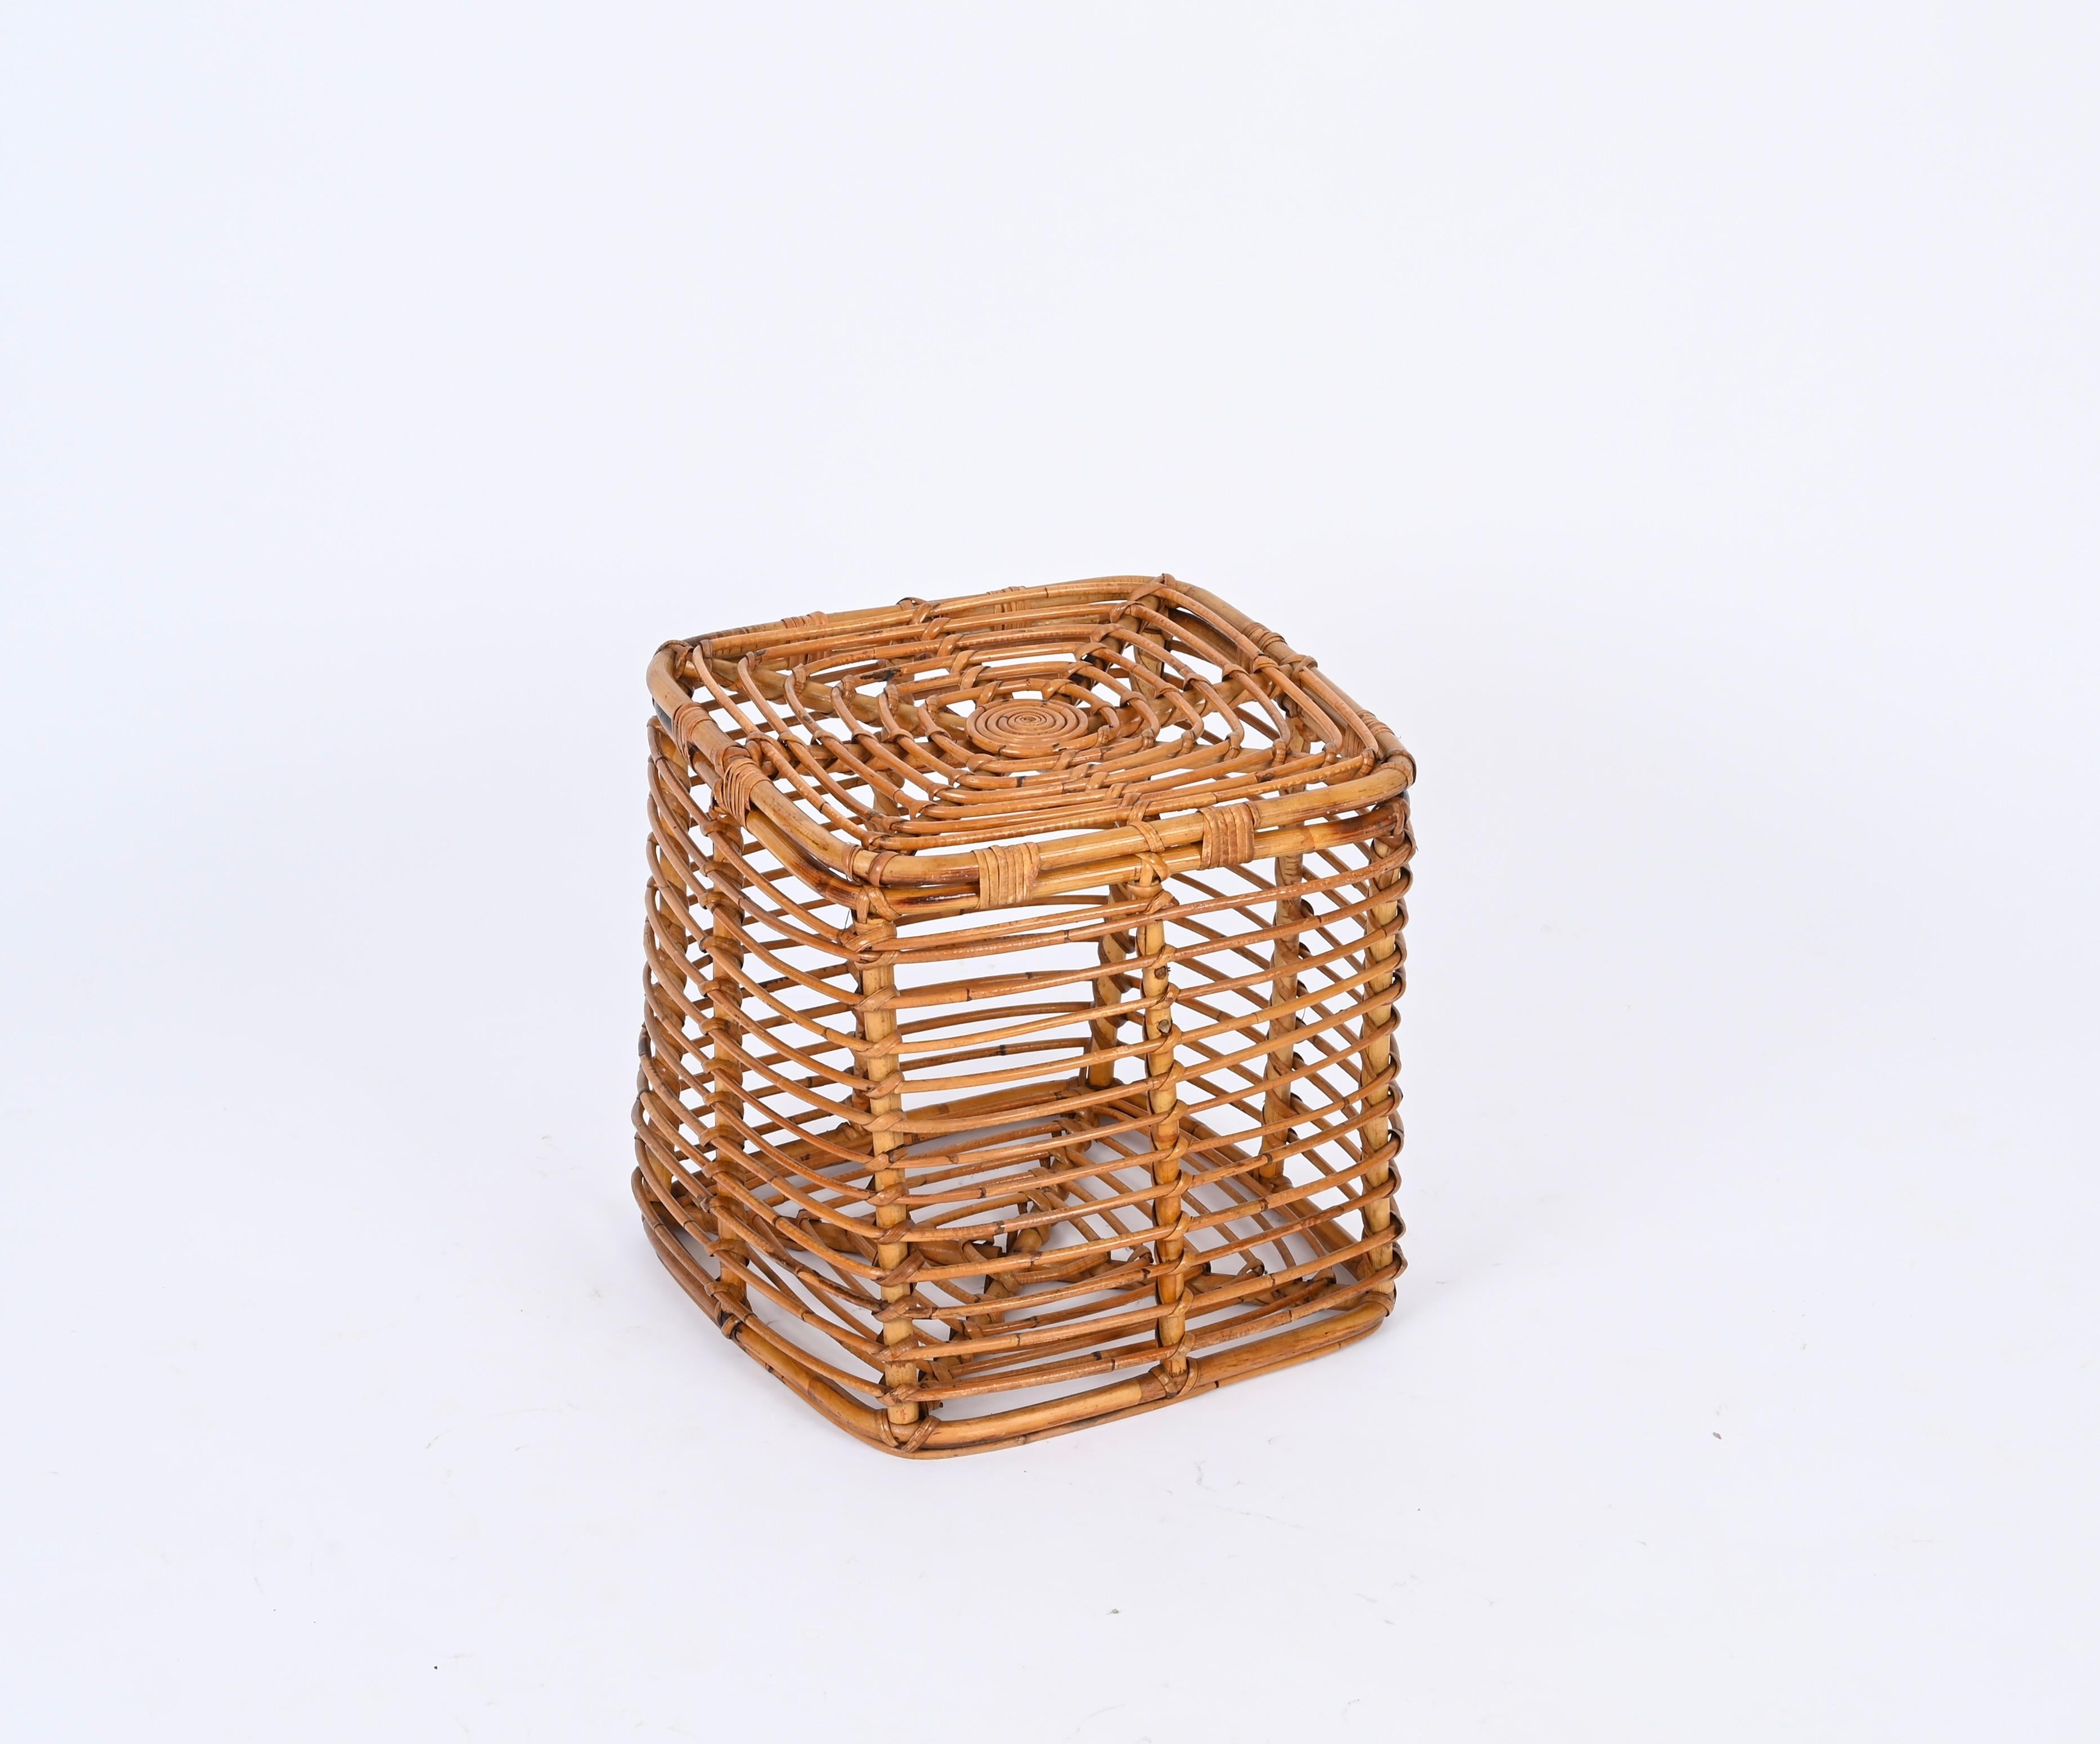 20th Century Midcentury Tito Agnoli Rattan and Wicker Square Pouf Stool, Italy, 1970s For Sale